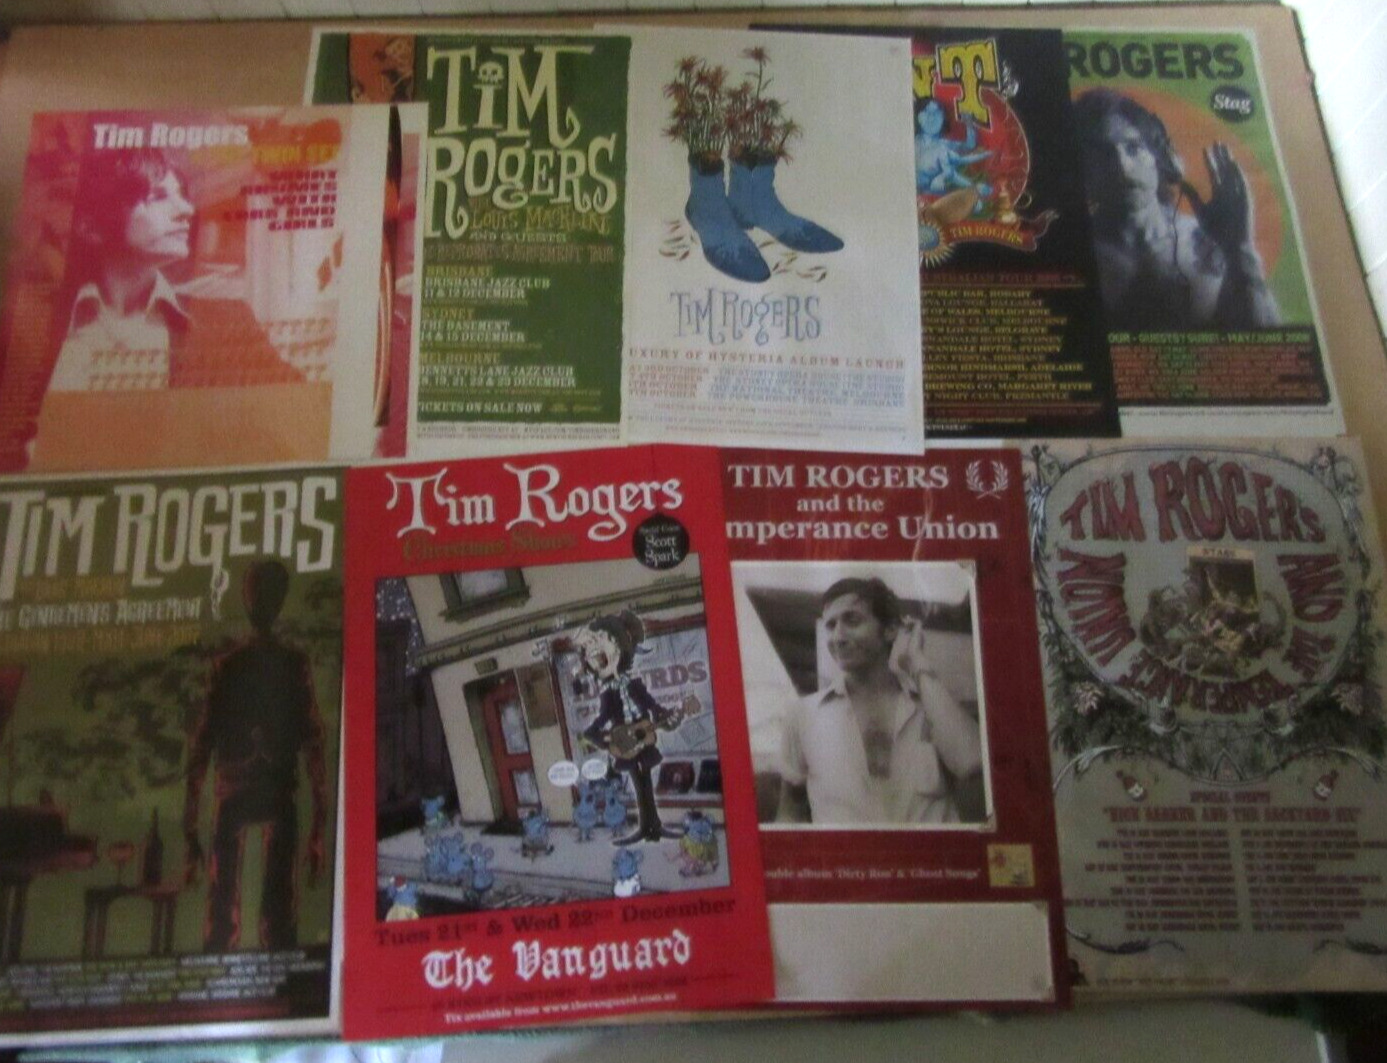 TIM ROGERS (YOU AM I) COLLECTION OF 9 ORIGINAL TOUR/PROMO POSTERS